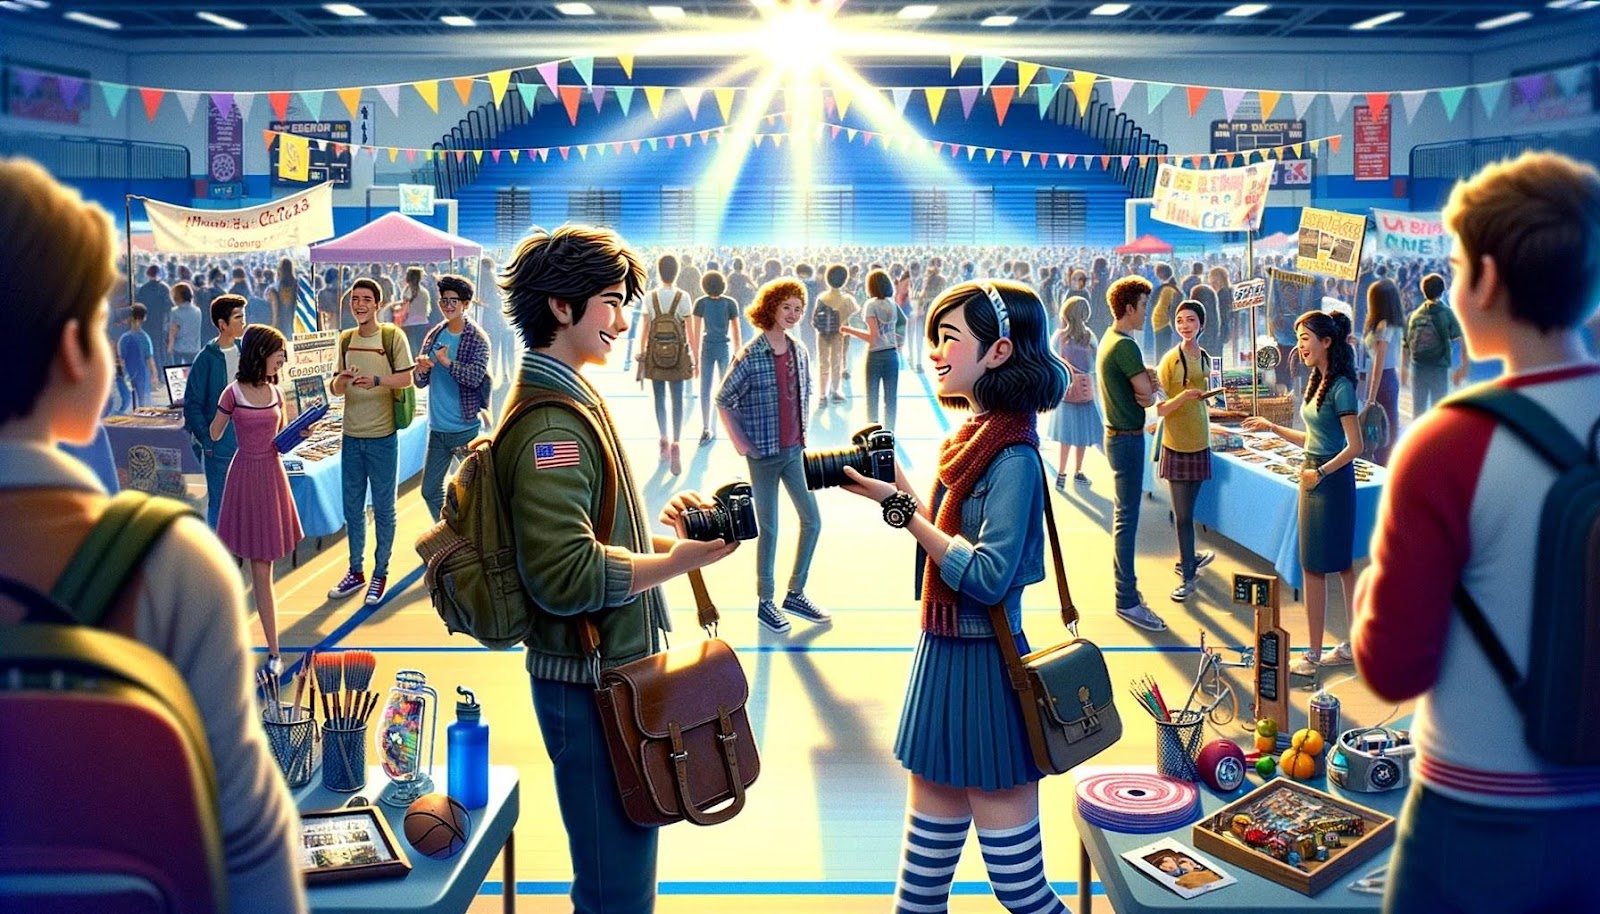  This design captures a bustling school club fair where two teenagers discover they share a common interest. Amid the vibrant activity of the fair, with booths representing various clubs and interests, the boy and girl are depicted in an animated conversation, each holding items that signify their hobbies. The dynamic atmosphere is filled 